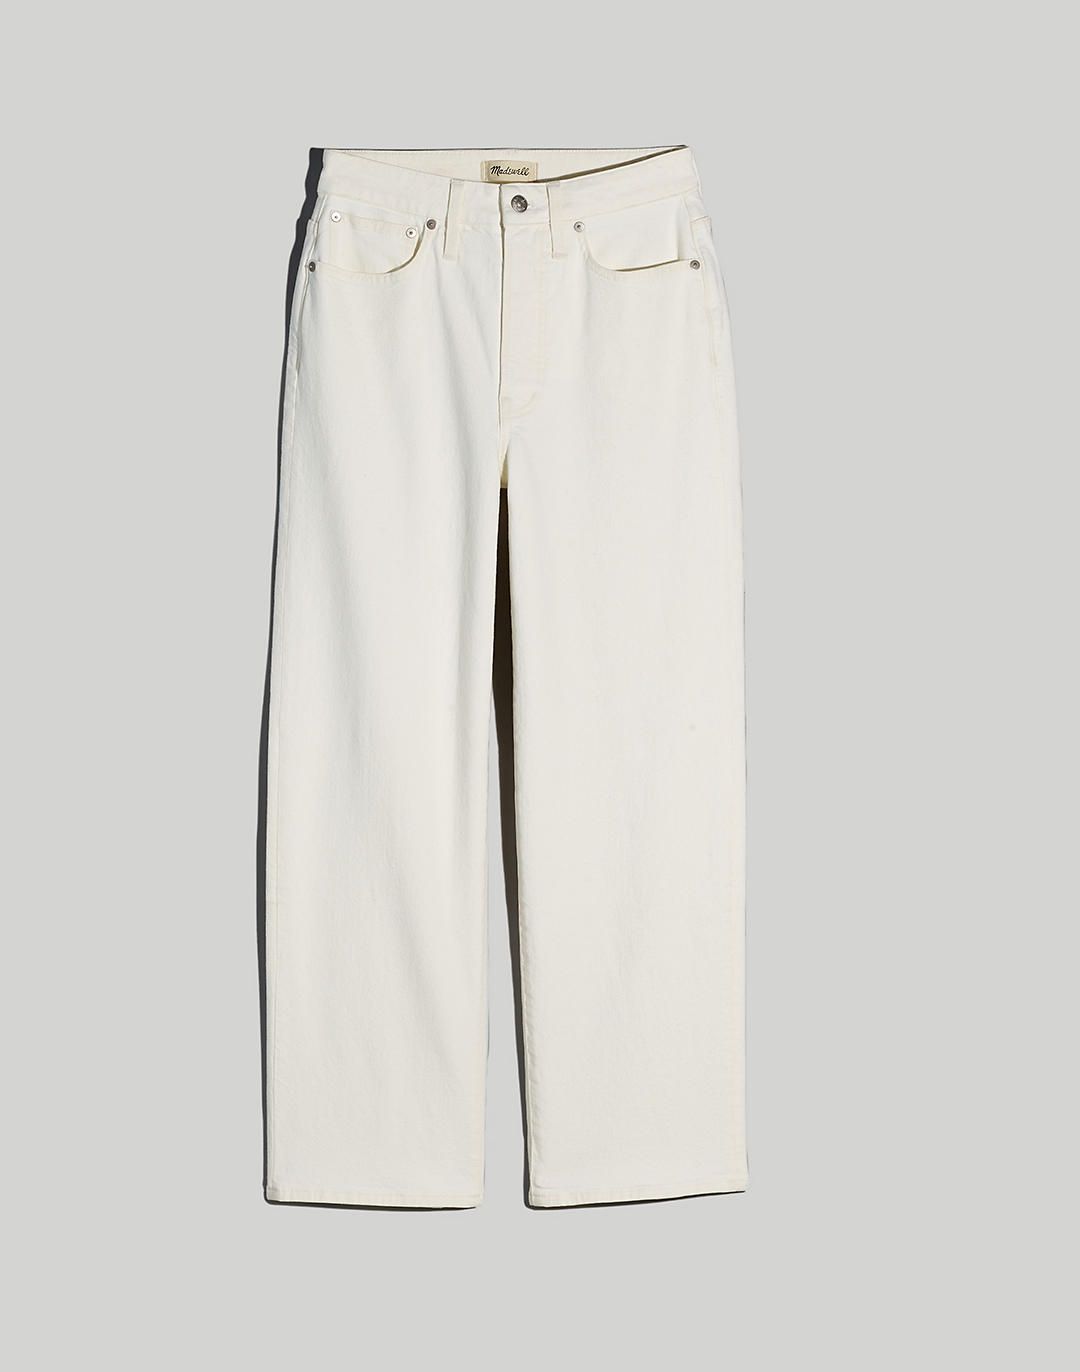 The Curvy Perfect Vintage Wide-Leg Crop Jean in Tile White | Madewell